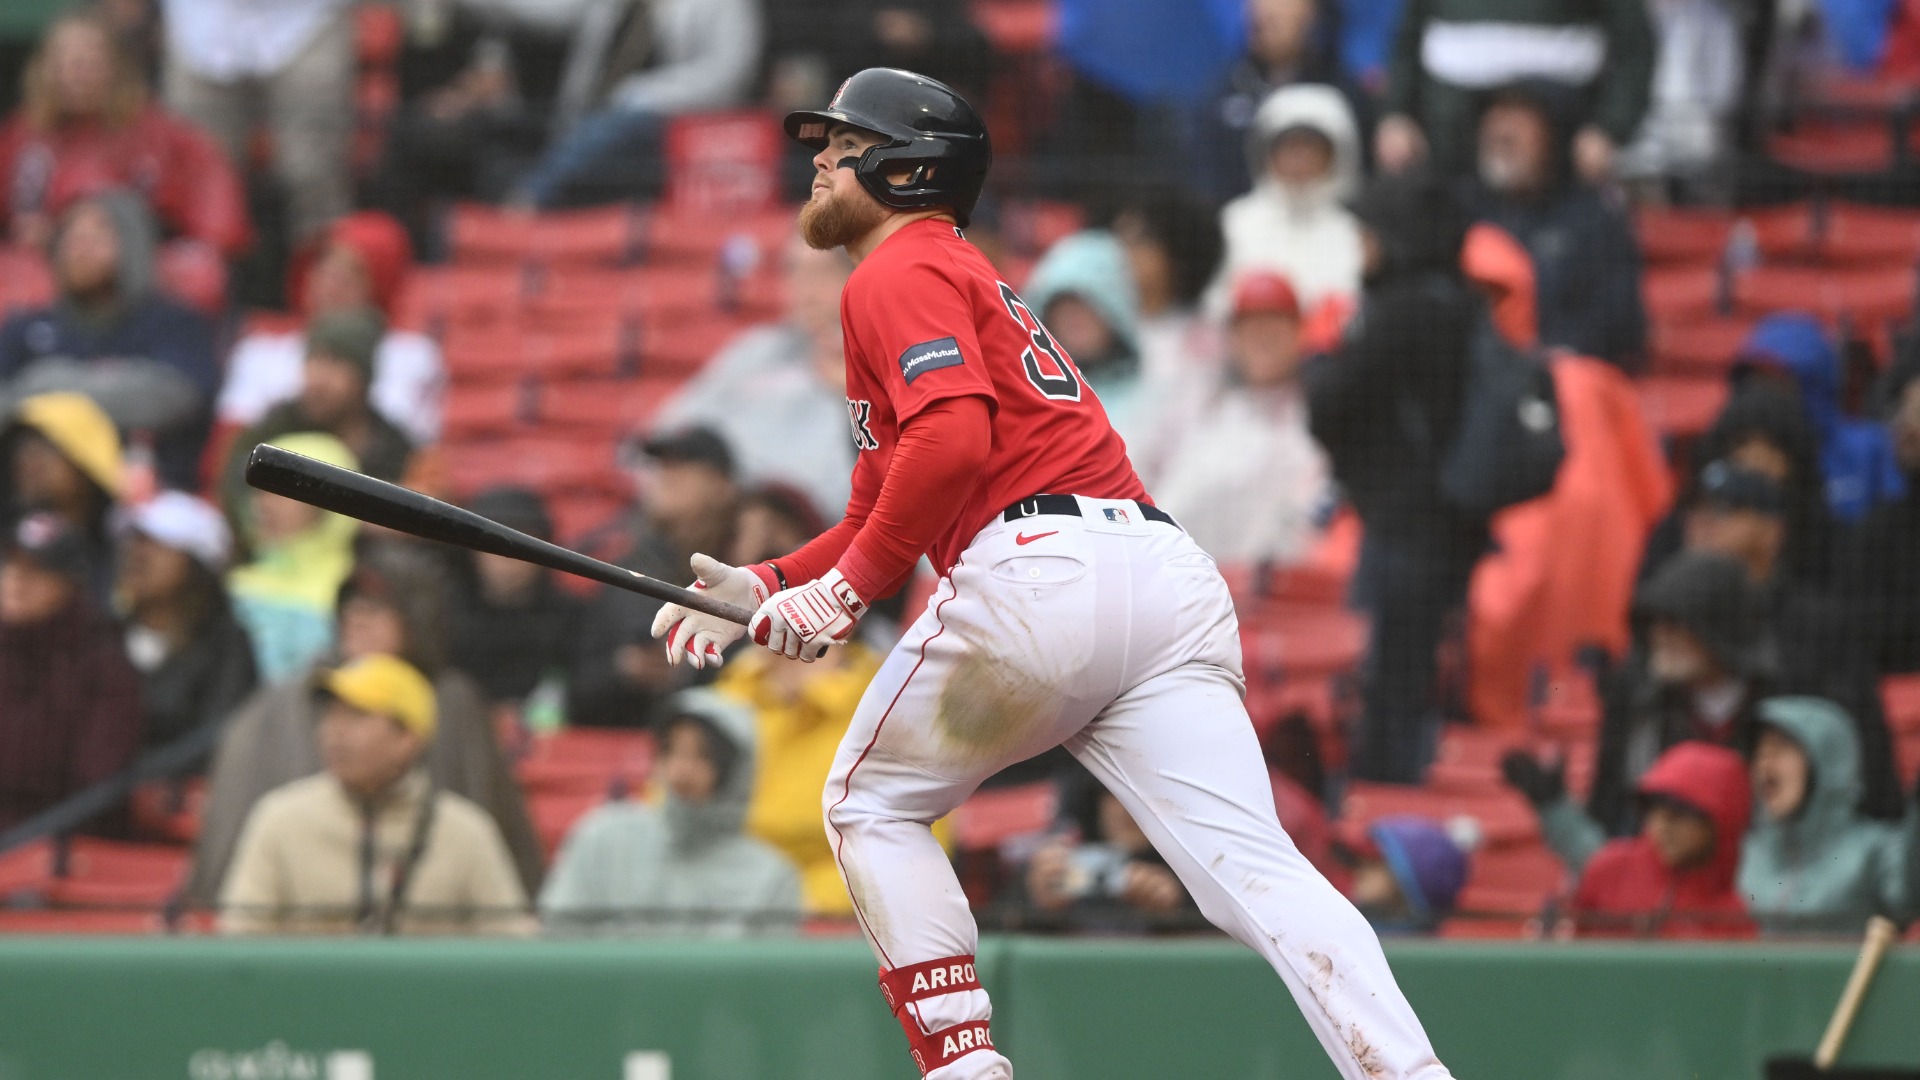 Red Sox Vs. Rays Lineups: Christian Arroyo Returns In Series Finale